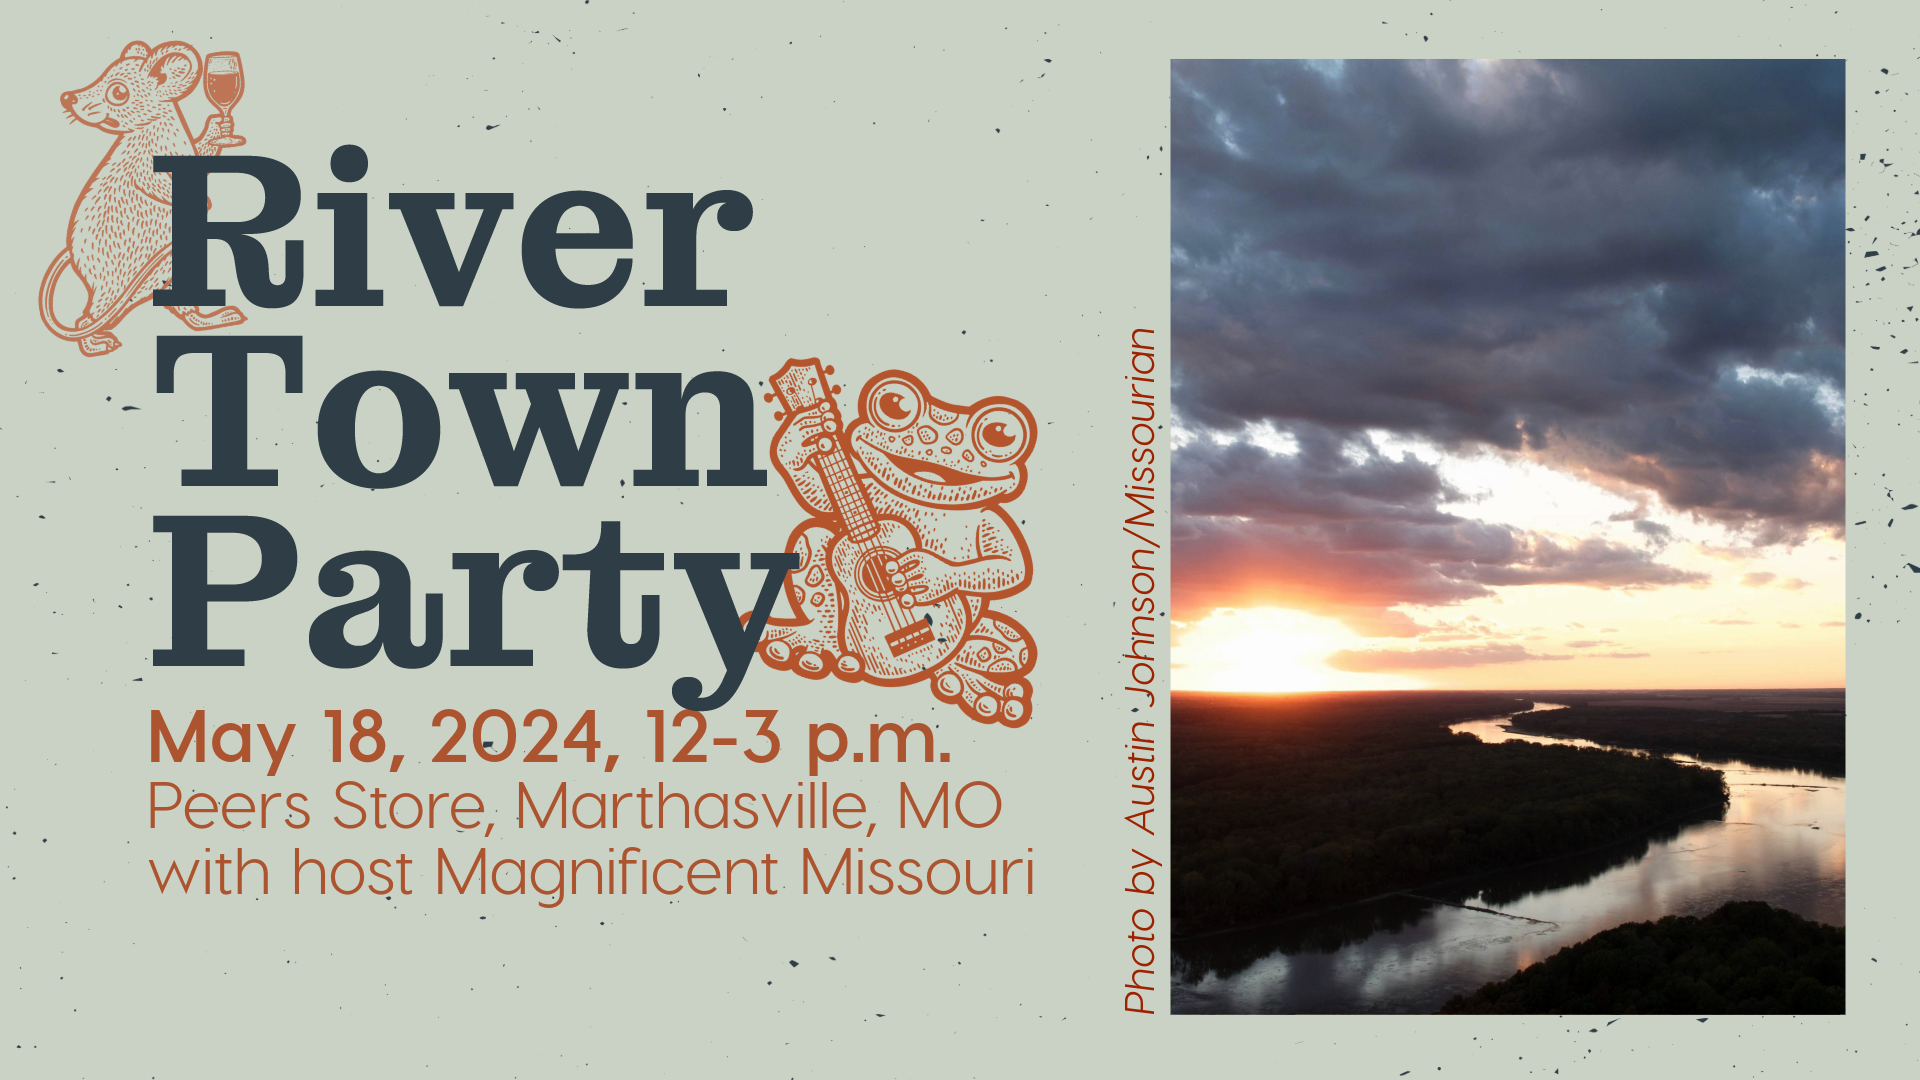 Graphic with a primary color vibe shows a photo of the Missouri River at sunset with text, "River Town Party" and graphics of a rat drinking wine and a frog playing music.